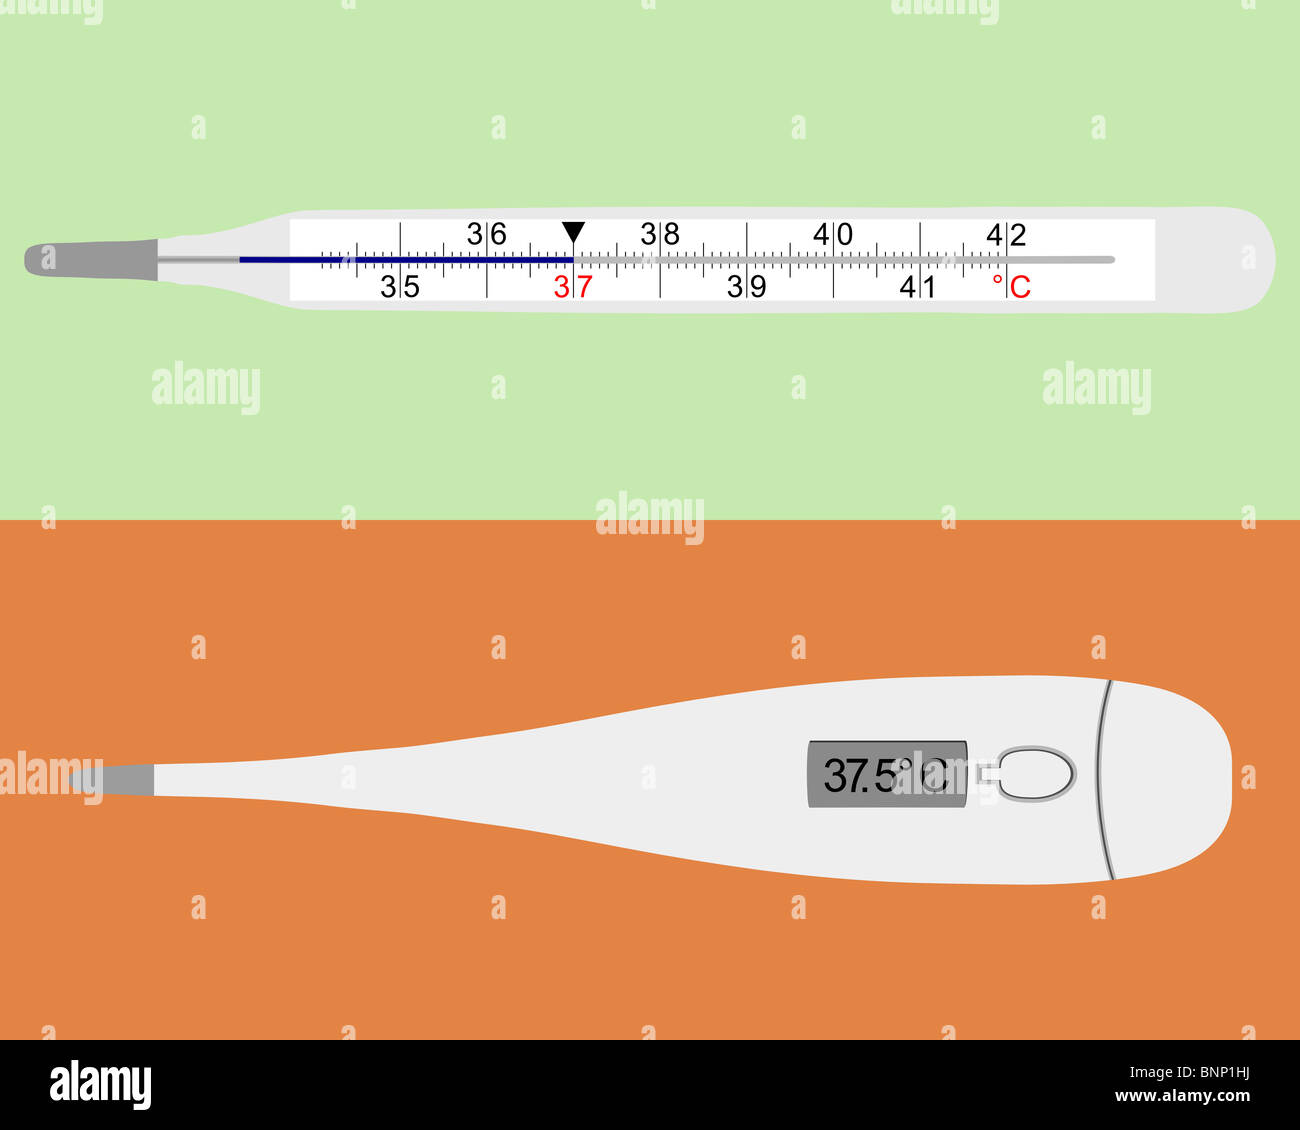 Illustration of analog and digital clinical thermometers on gray Stock Photo